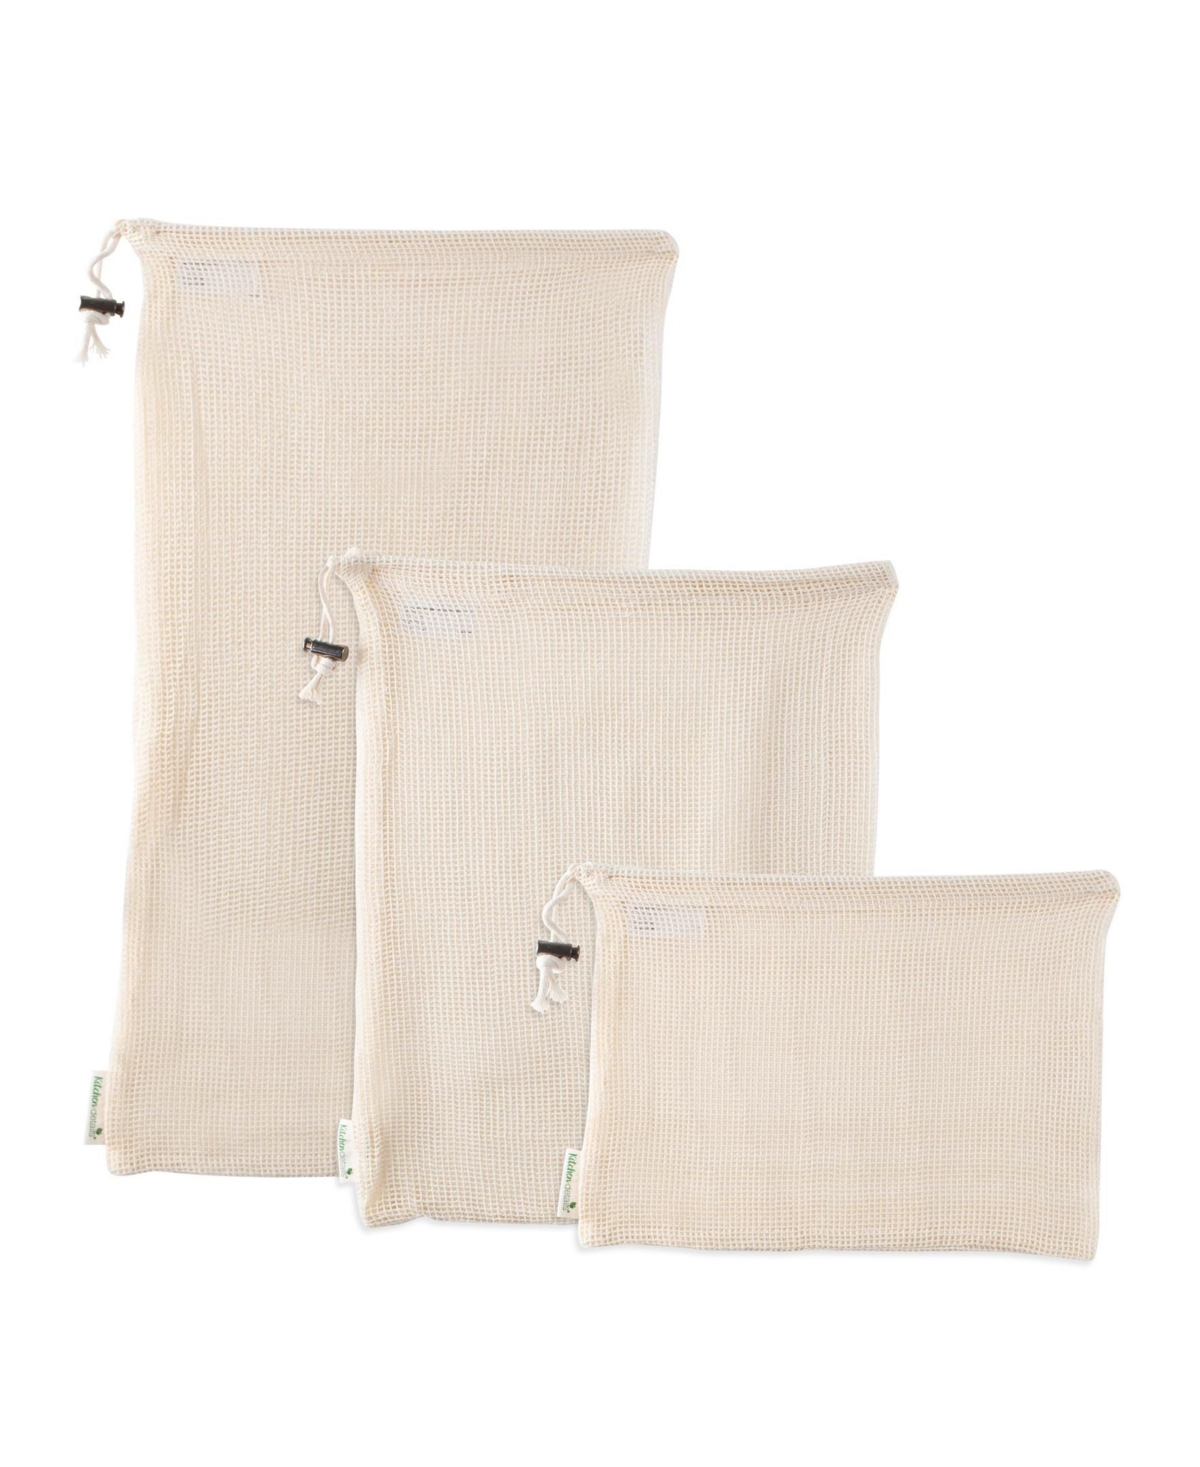 Cotton Mesh Produce Bags, Set of 3 - Natural